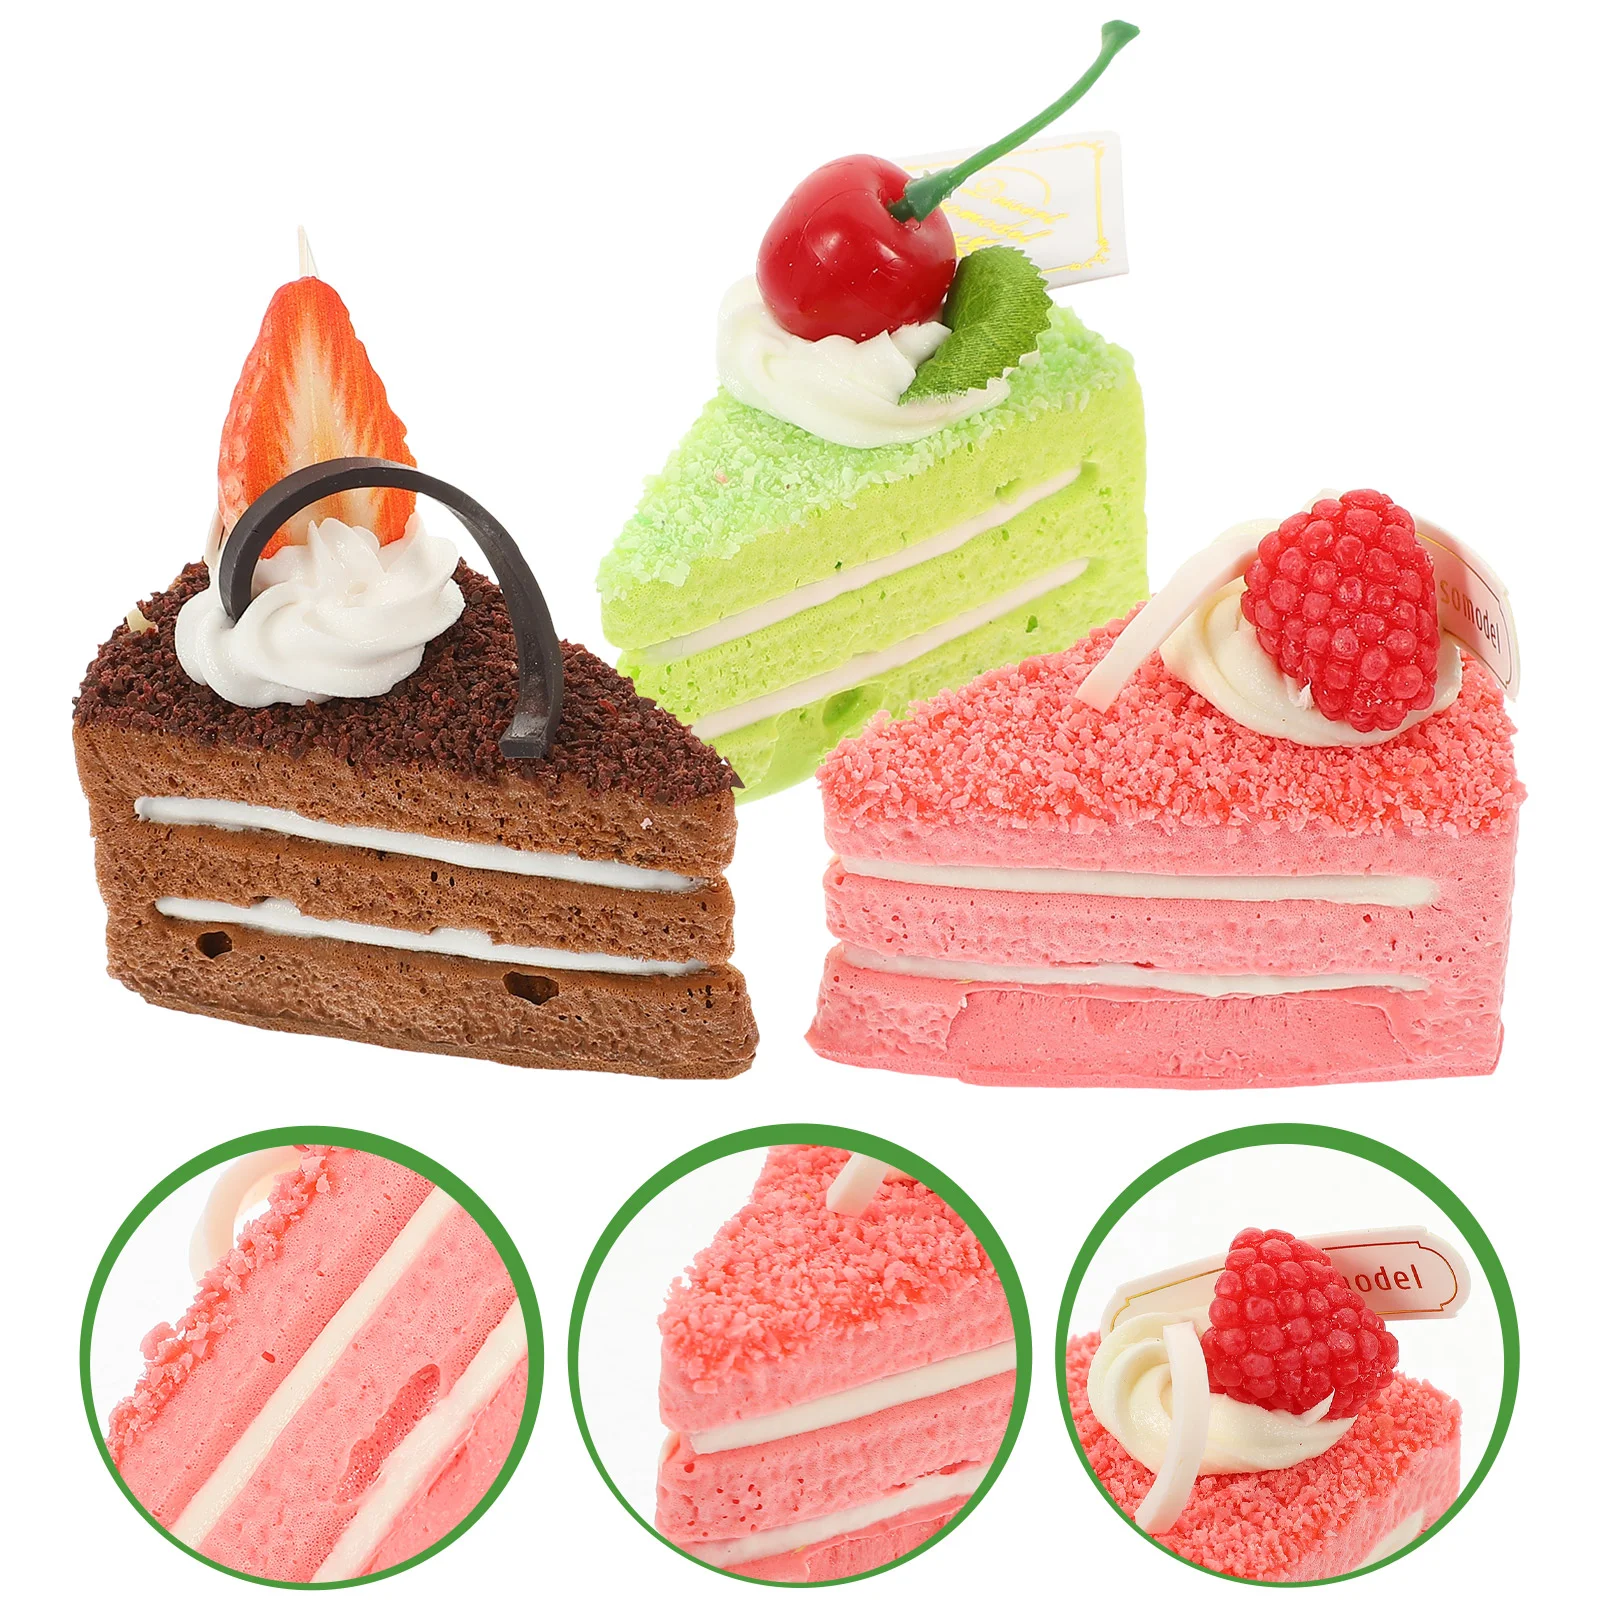 

3 Pcs Faux Cake Realistic Food Props Fake Desserts Photo Ornament Artificial Cupcake Birthday Toppers Cakes